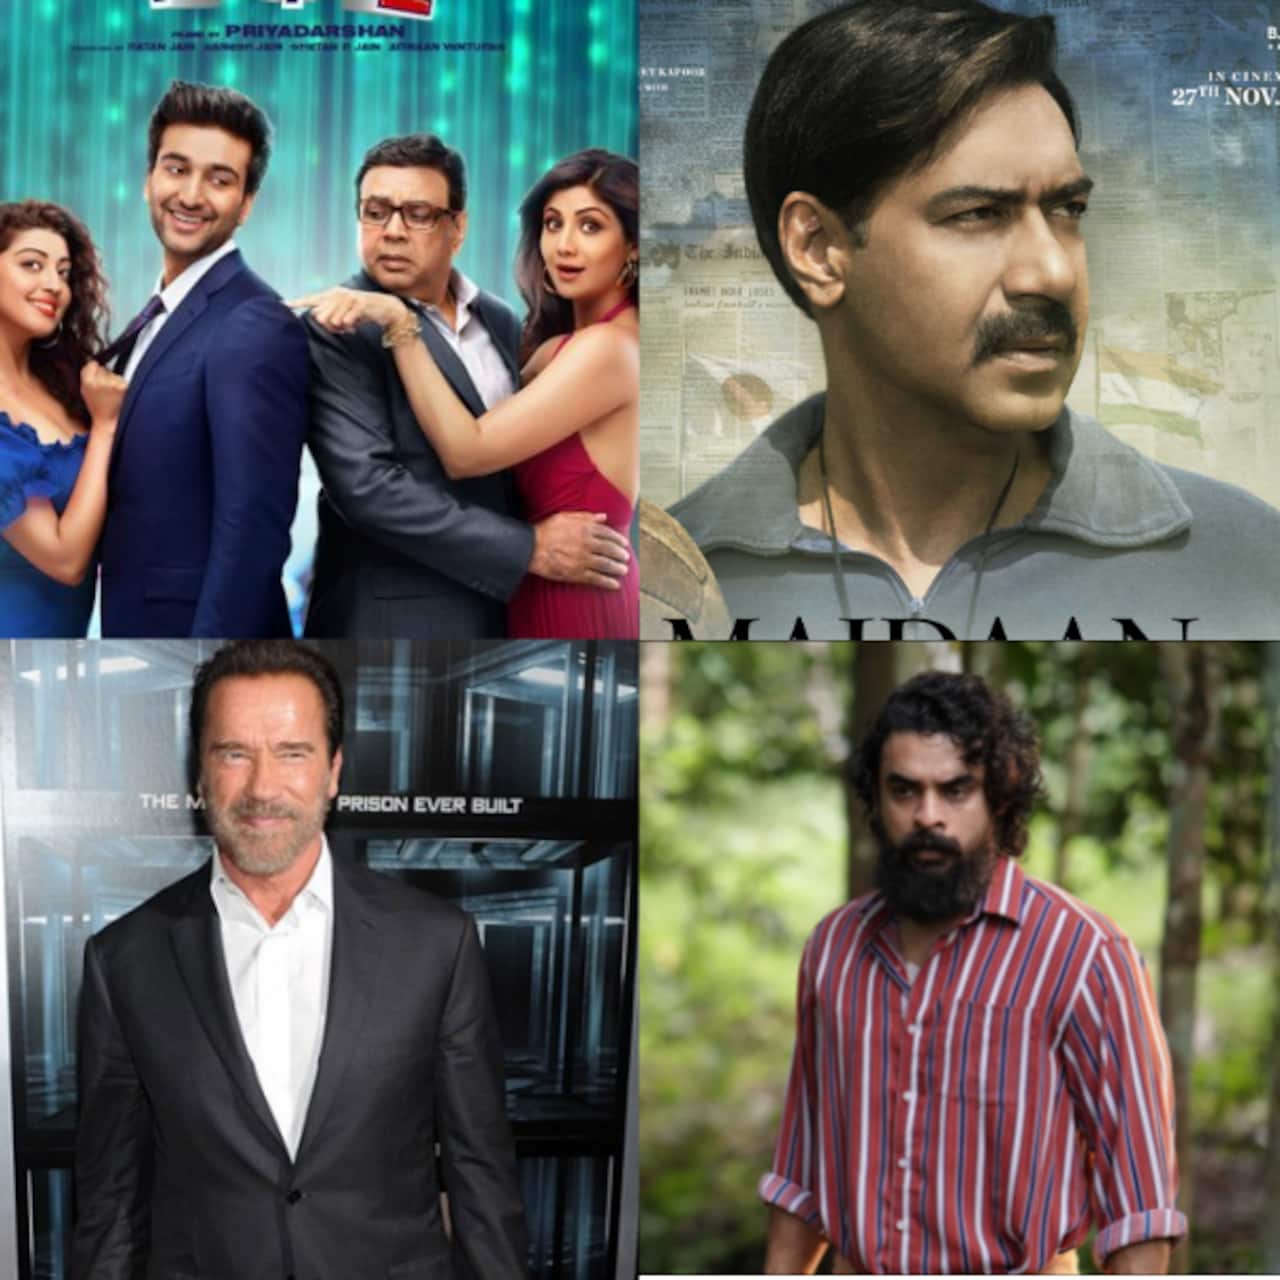 Trending OTT News Today: Bhoot Police, Hungama 2, Kala's release, Arnold Schwarzenegger in a Netflix series and more